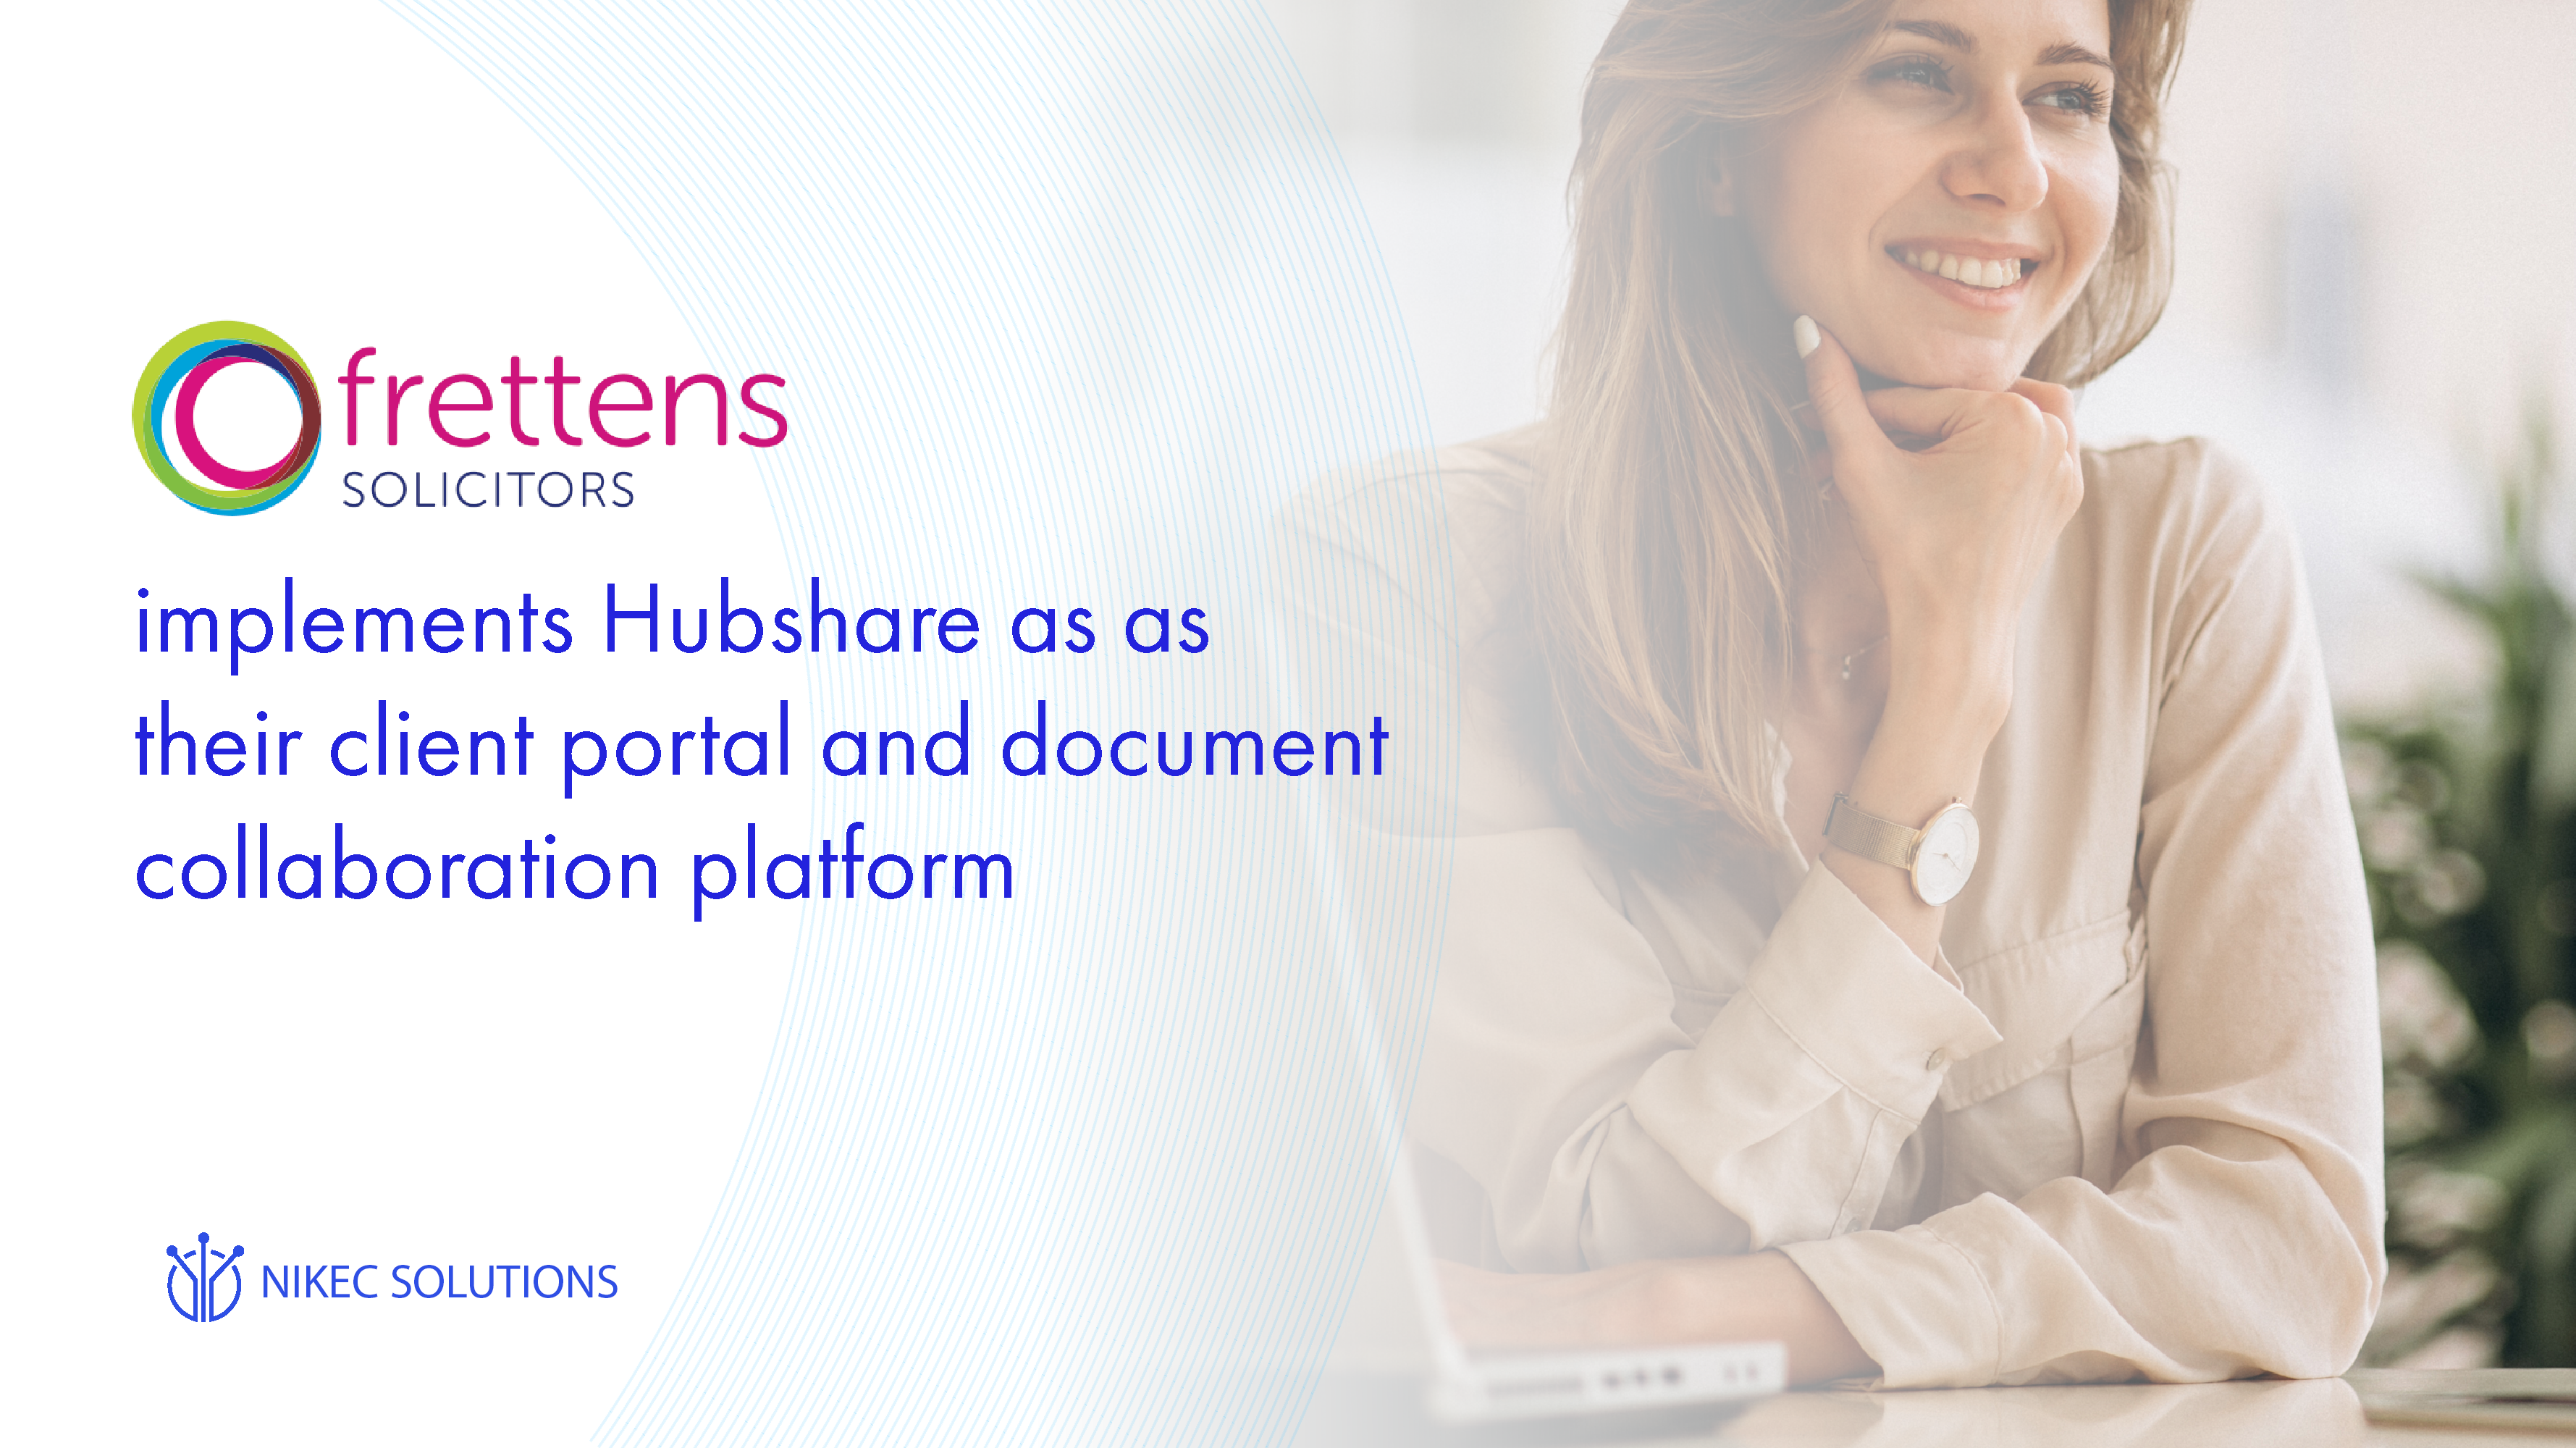 Frettens implements Hubshare as as their client portal and document collaboration platform to improve client retention.